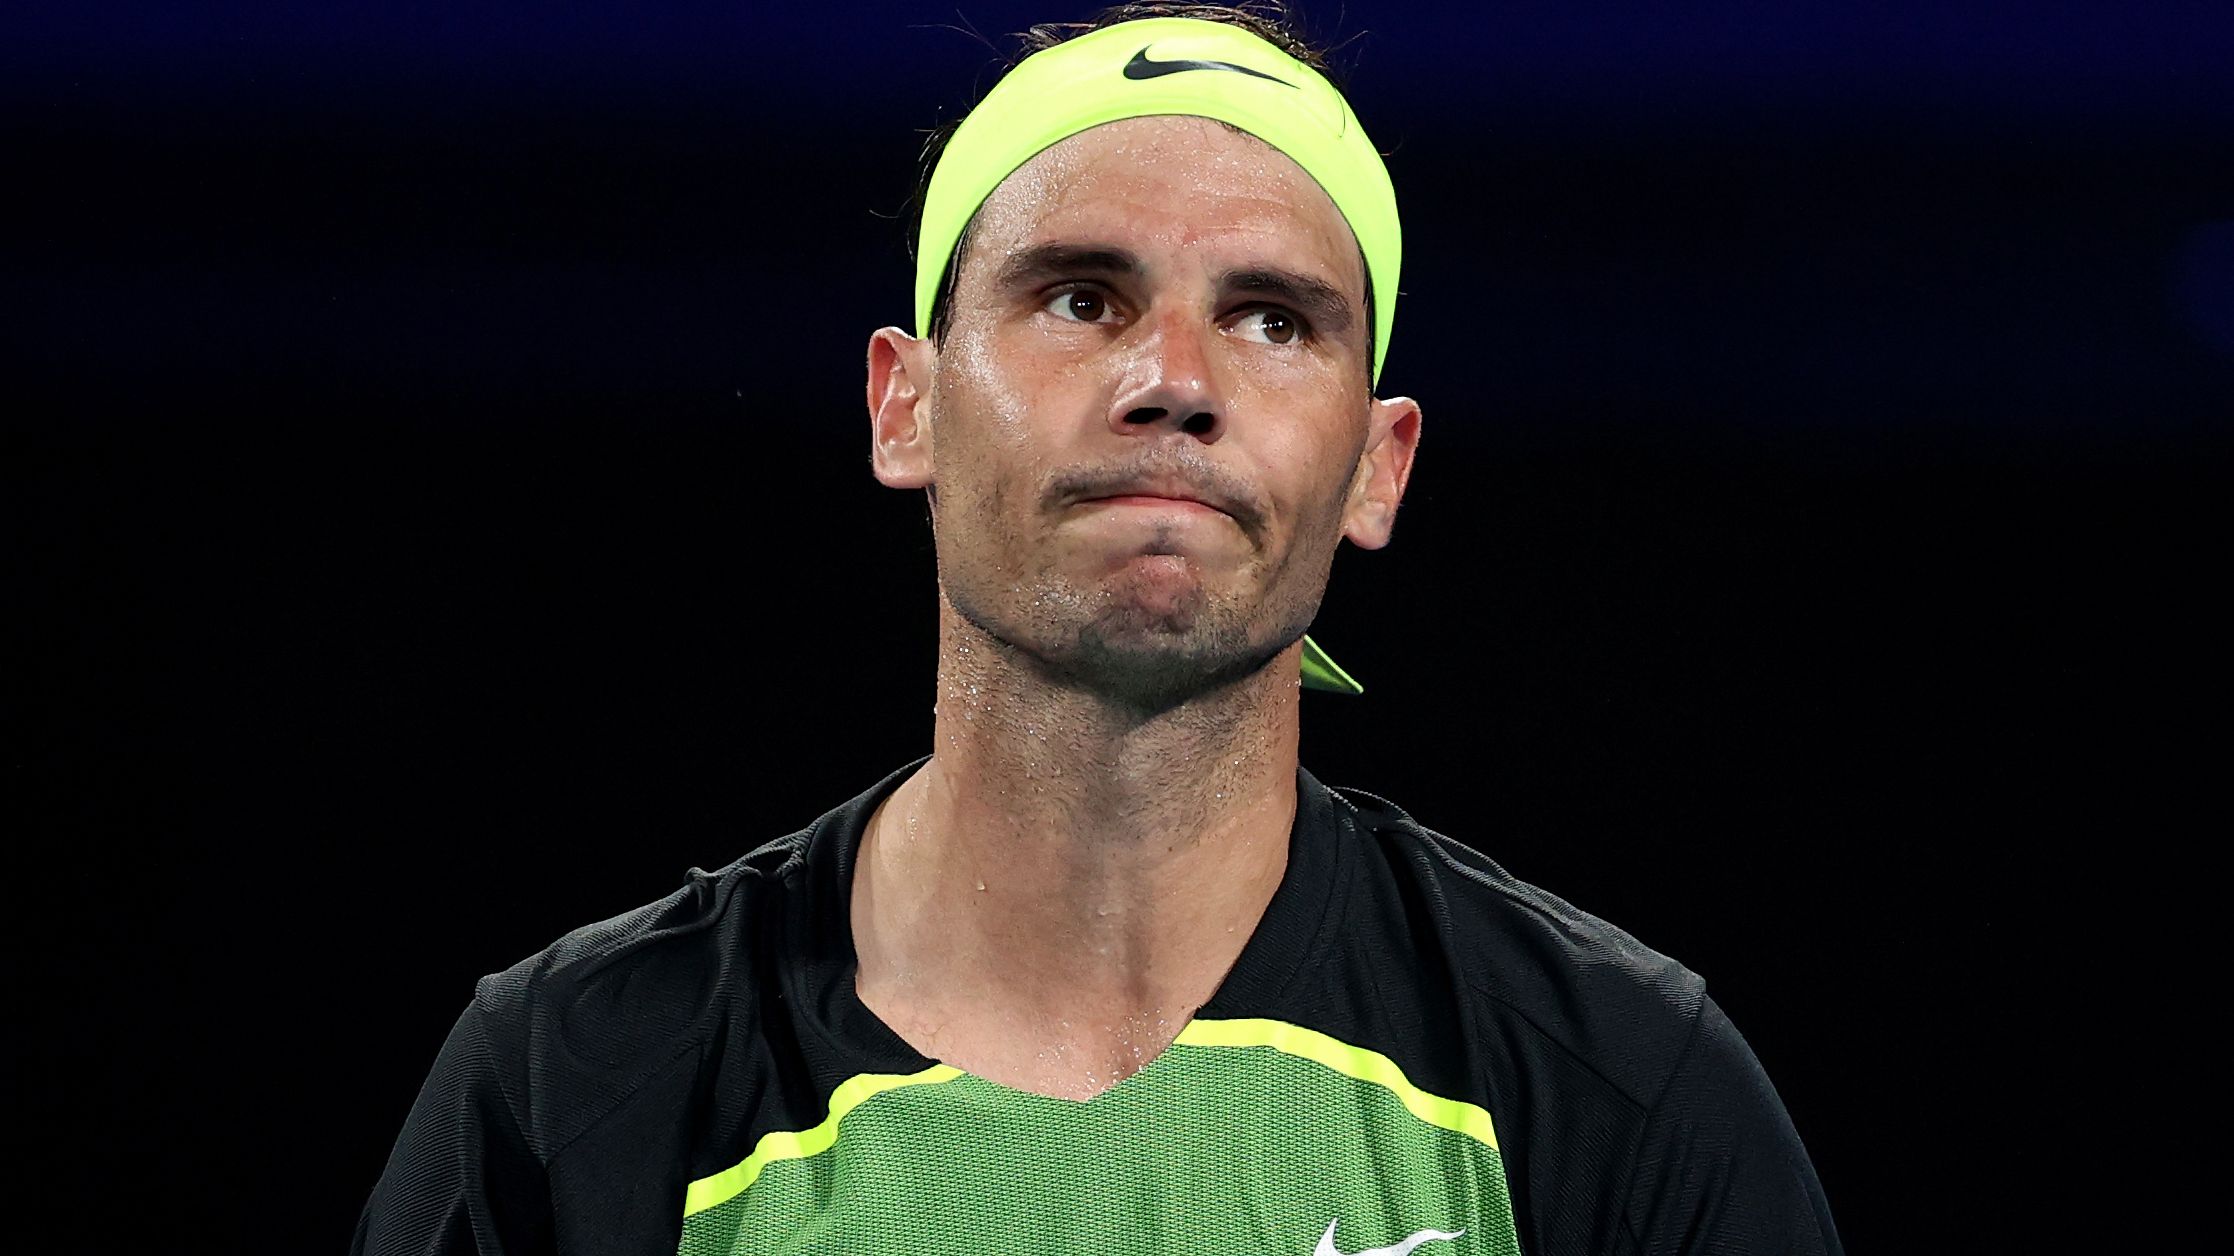 SYDNEY, AUSTRALIA - JANUARY 02: Rafael Nadal of Spain reacts in his group D match against Alex de Minaur of Australia during day five of the 2023 United Cup at Ken Rosewall Arena on January 02, 2023 in Sydney, Australia. (Photo by Brendon Thorne/Getty Images)